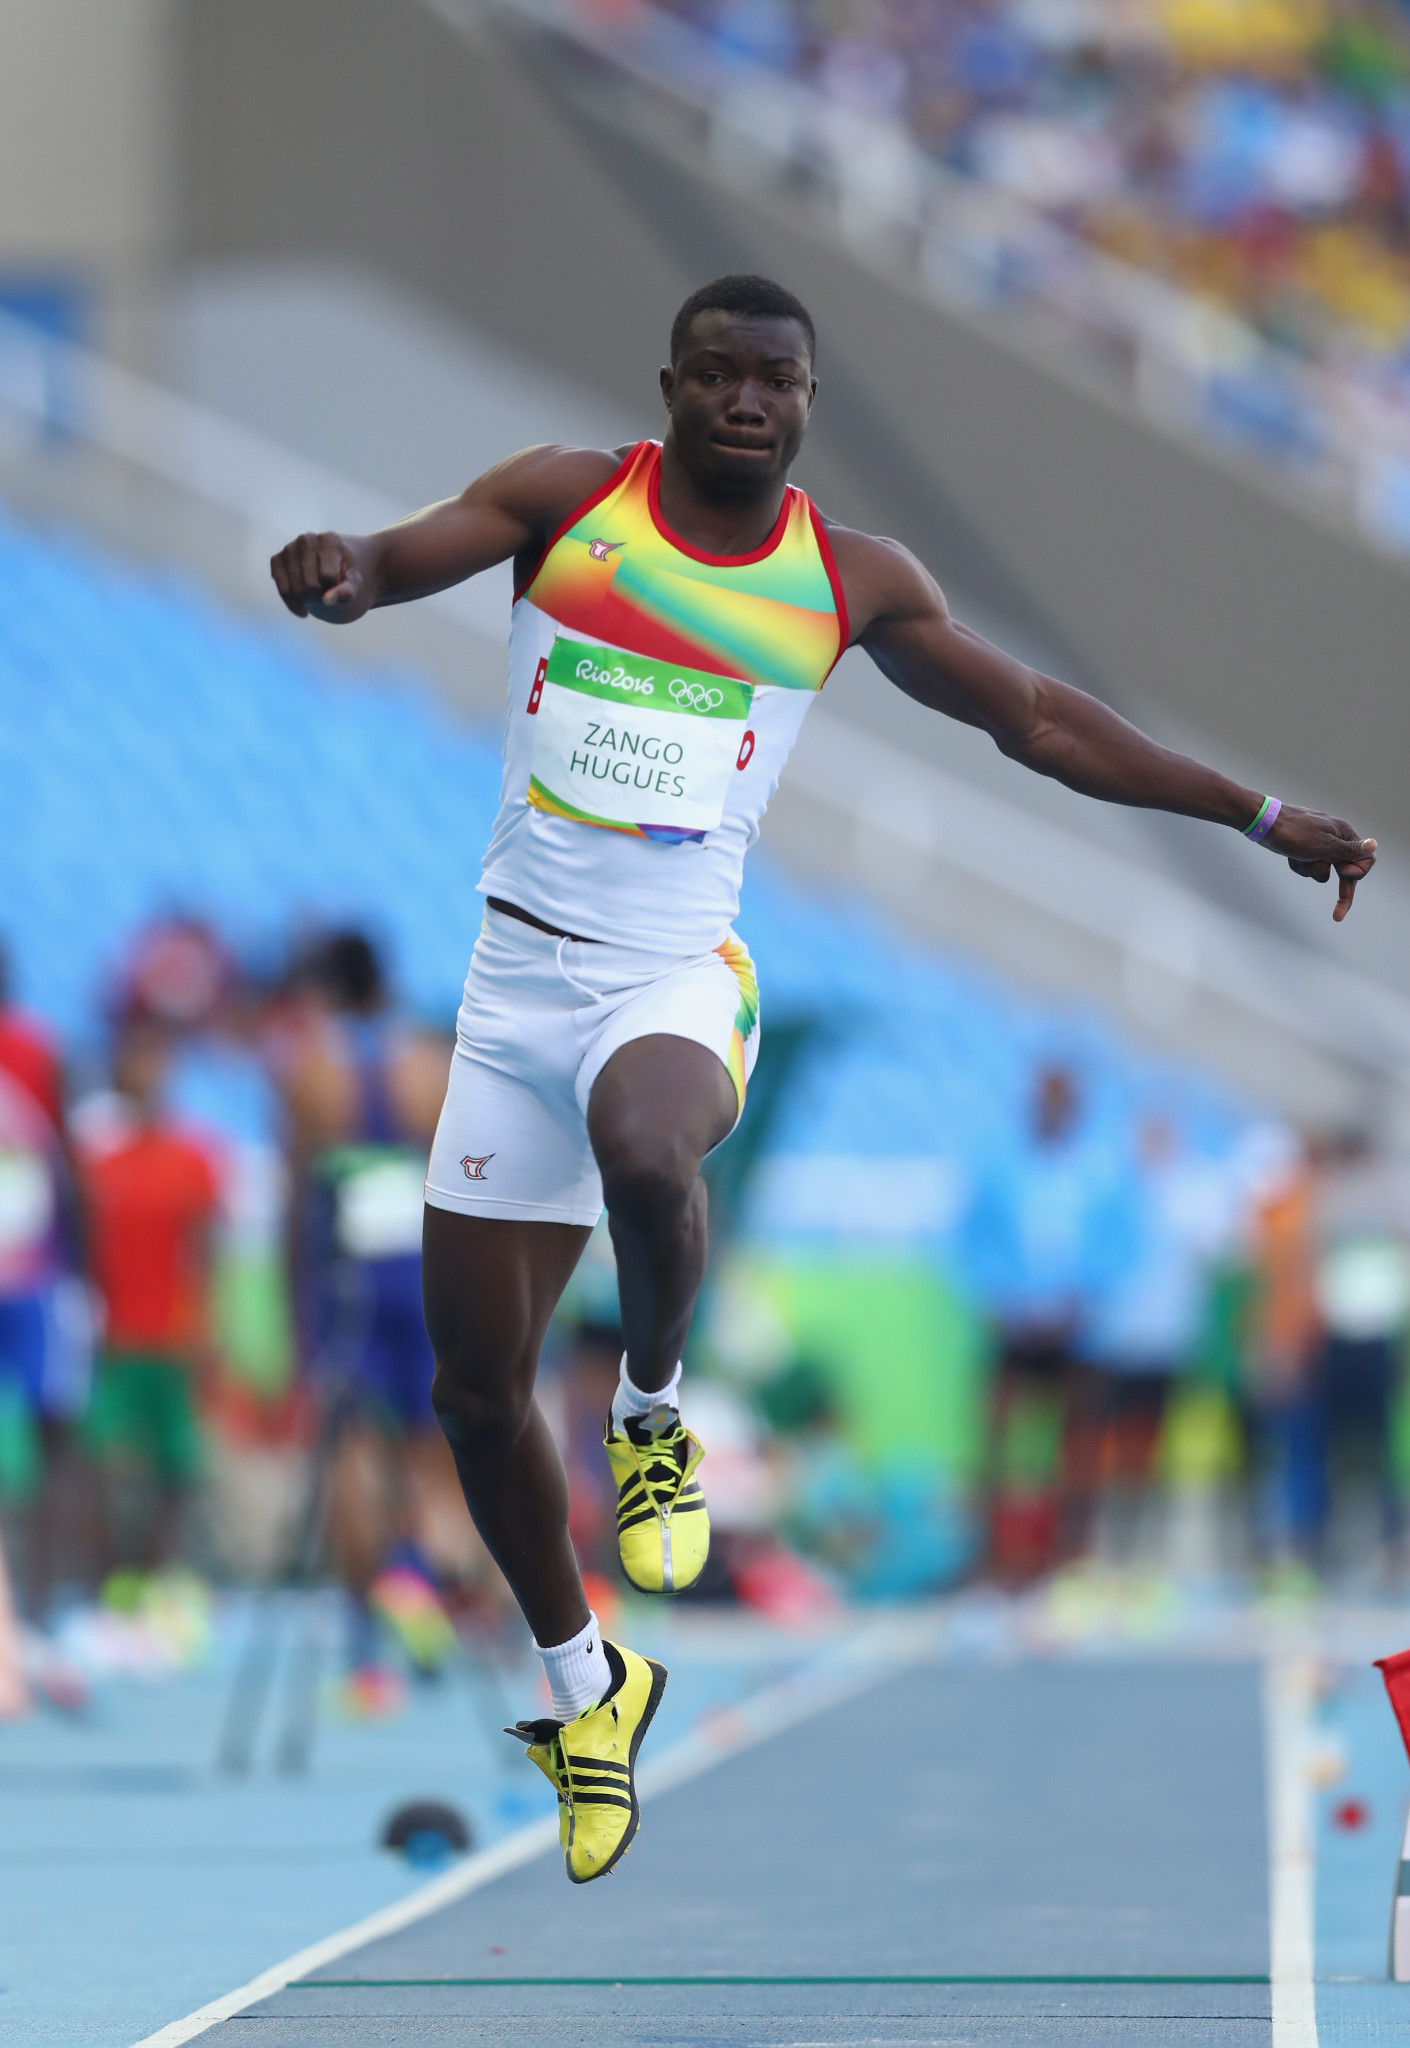 Burkina Faso's Hugues Zango, pictured competing at Rio 2016, was another winner today